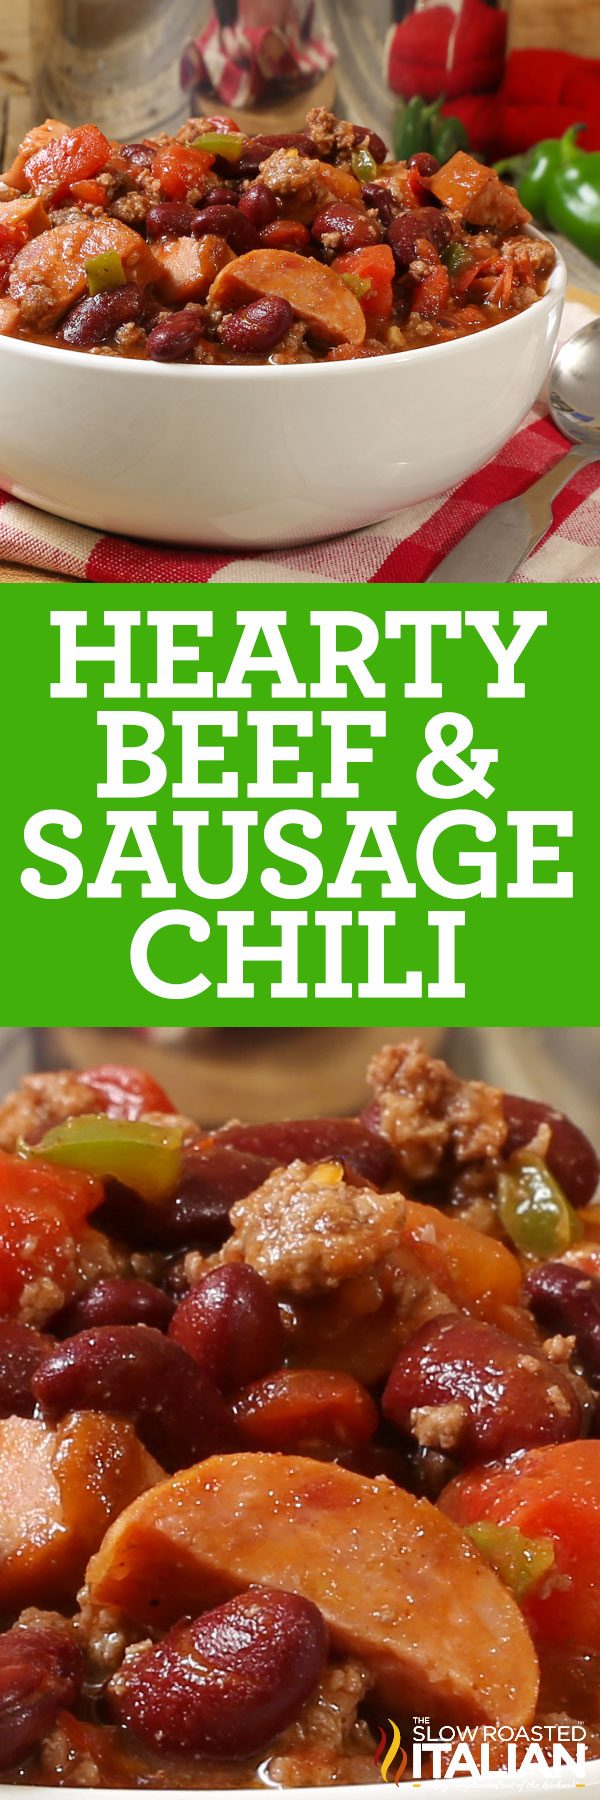 hearty-beef-and-sausage-chili-pin-2483956